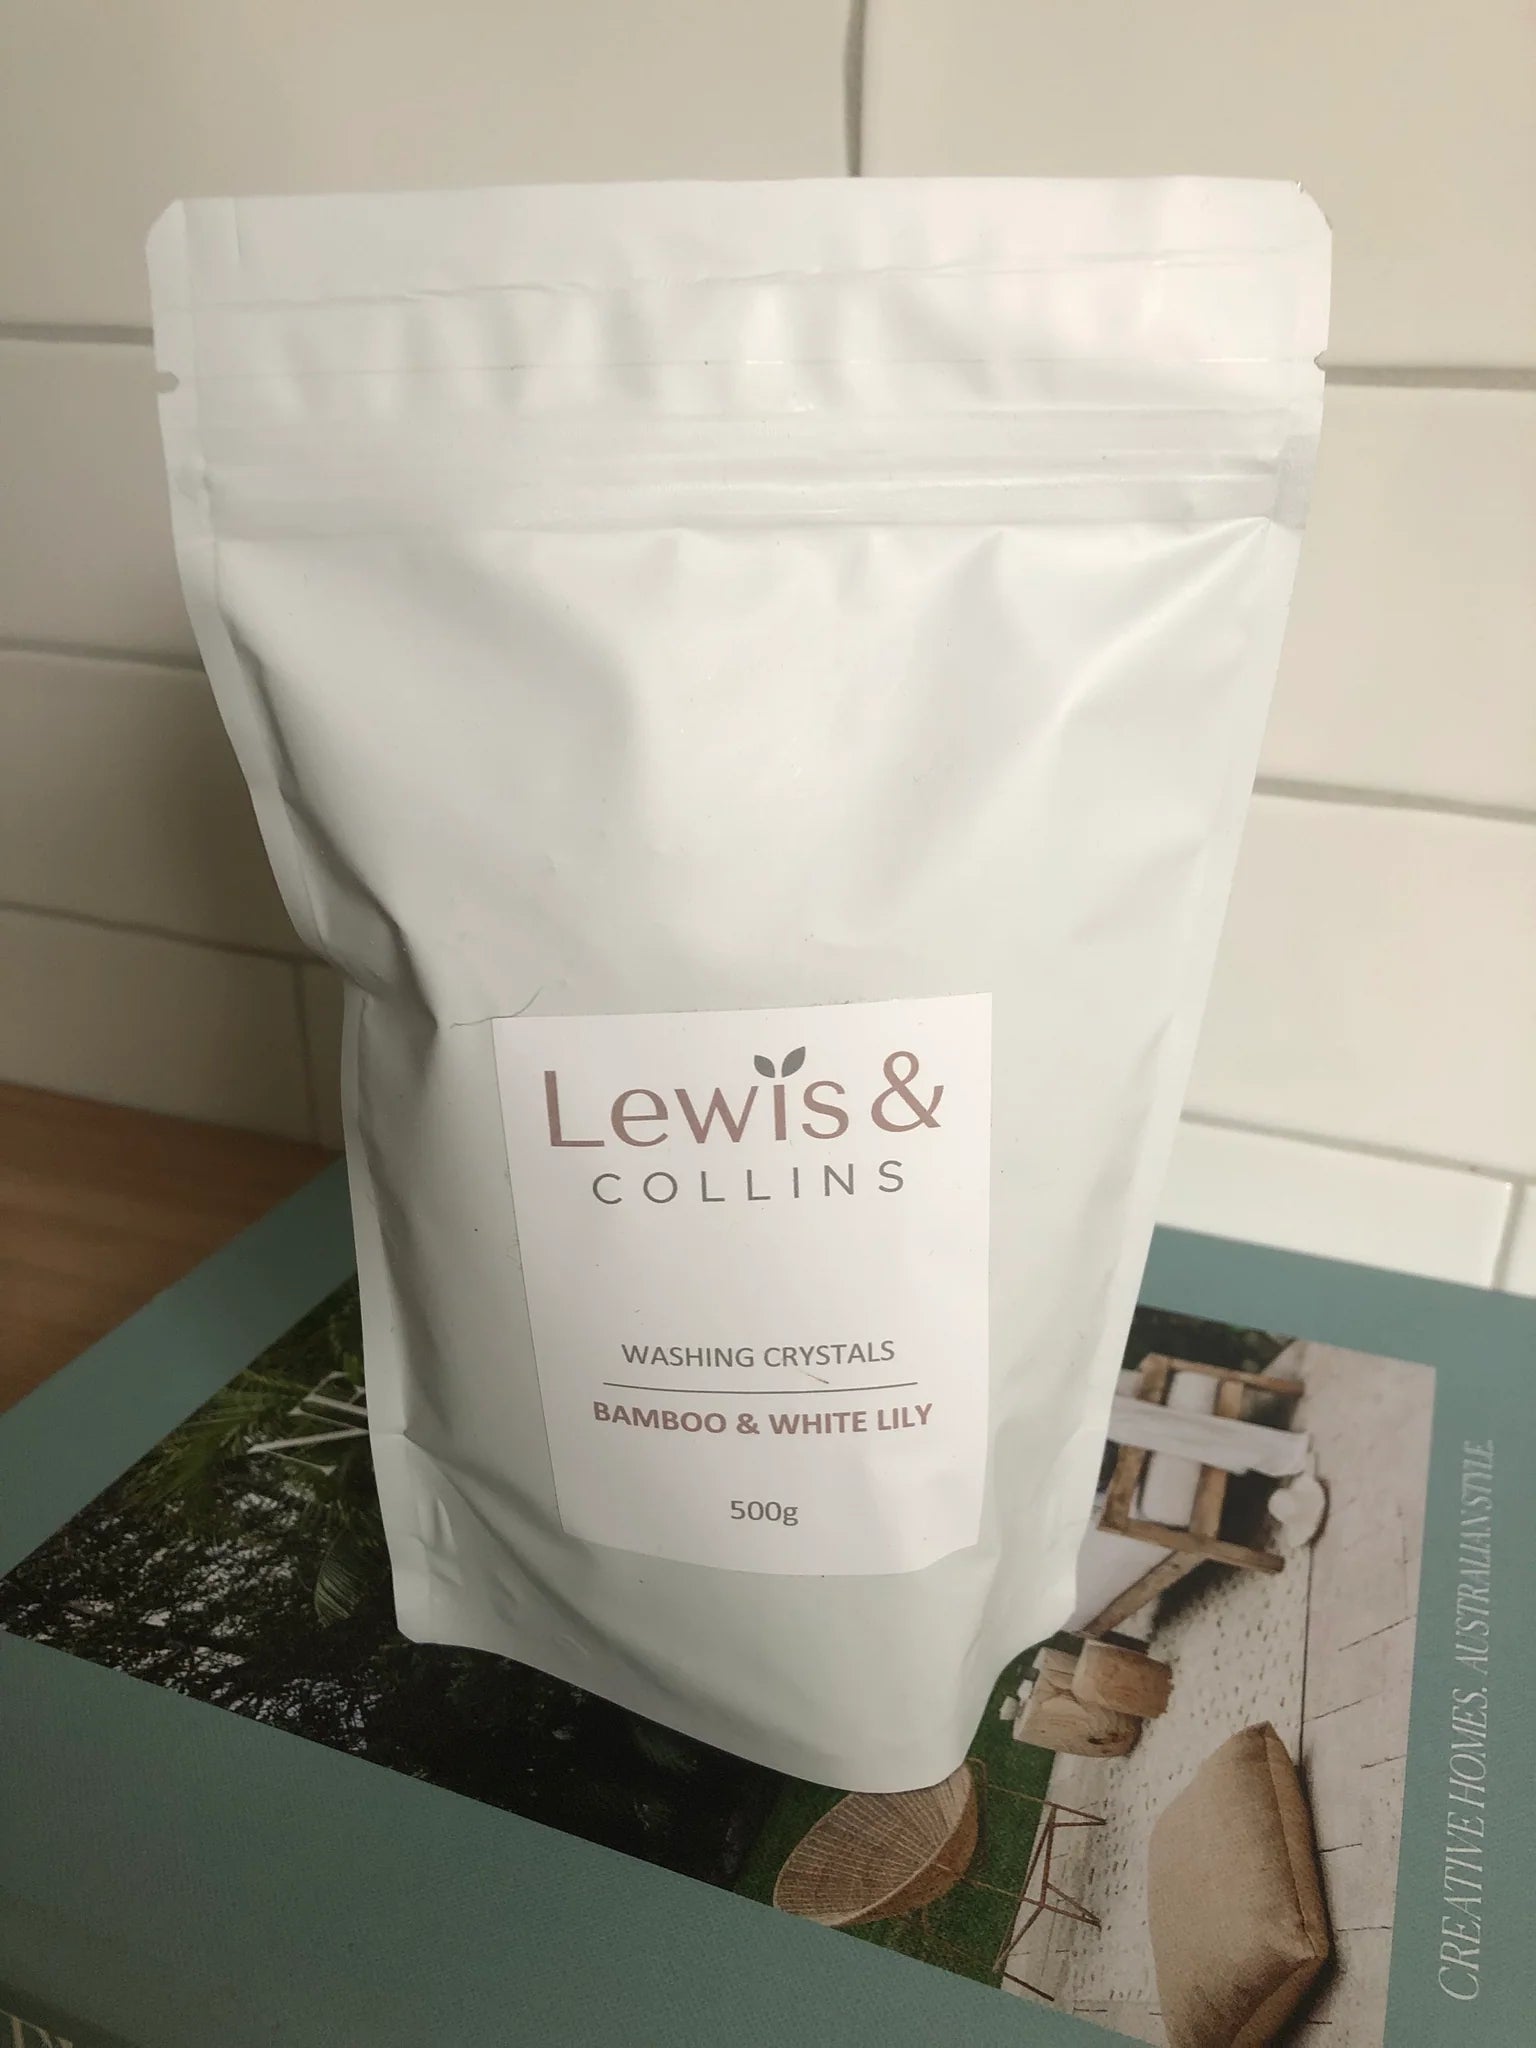 Lewis & Collins Washing Crystals Bamboo & White Lily 500g